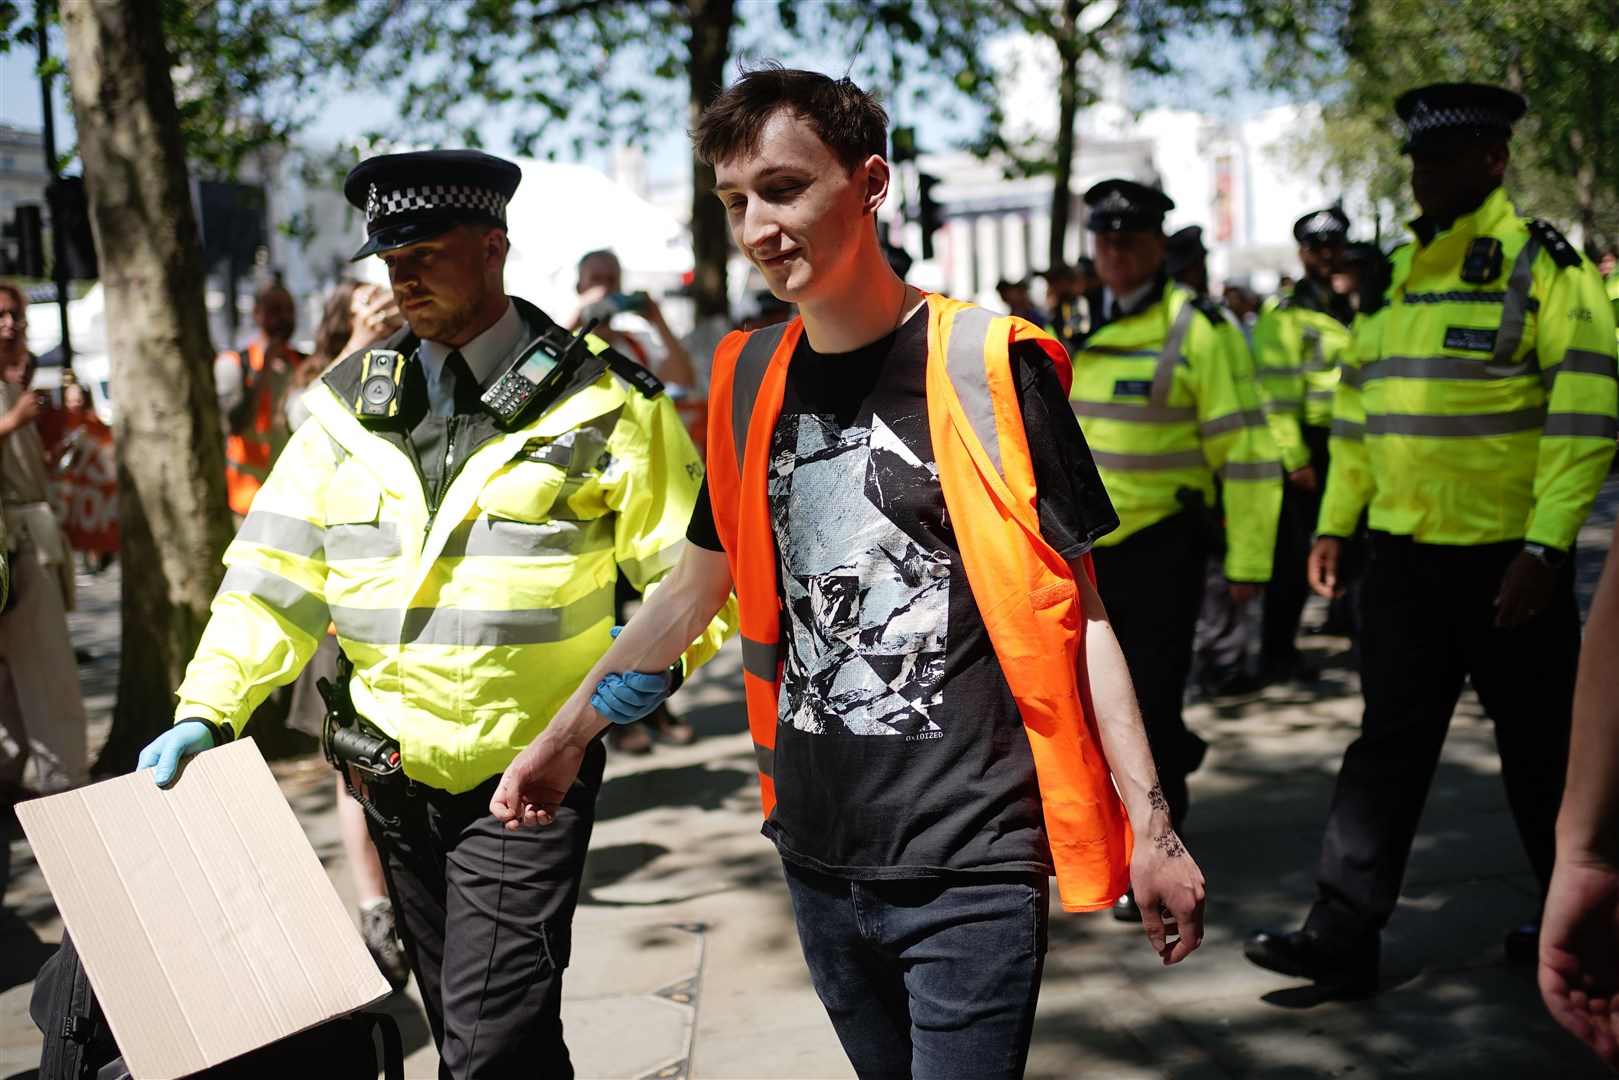 Police detain a Just Stop Oil activist during a protest by the environmental campaigners in central London (Aaron Chown/PA)